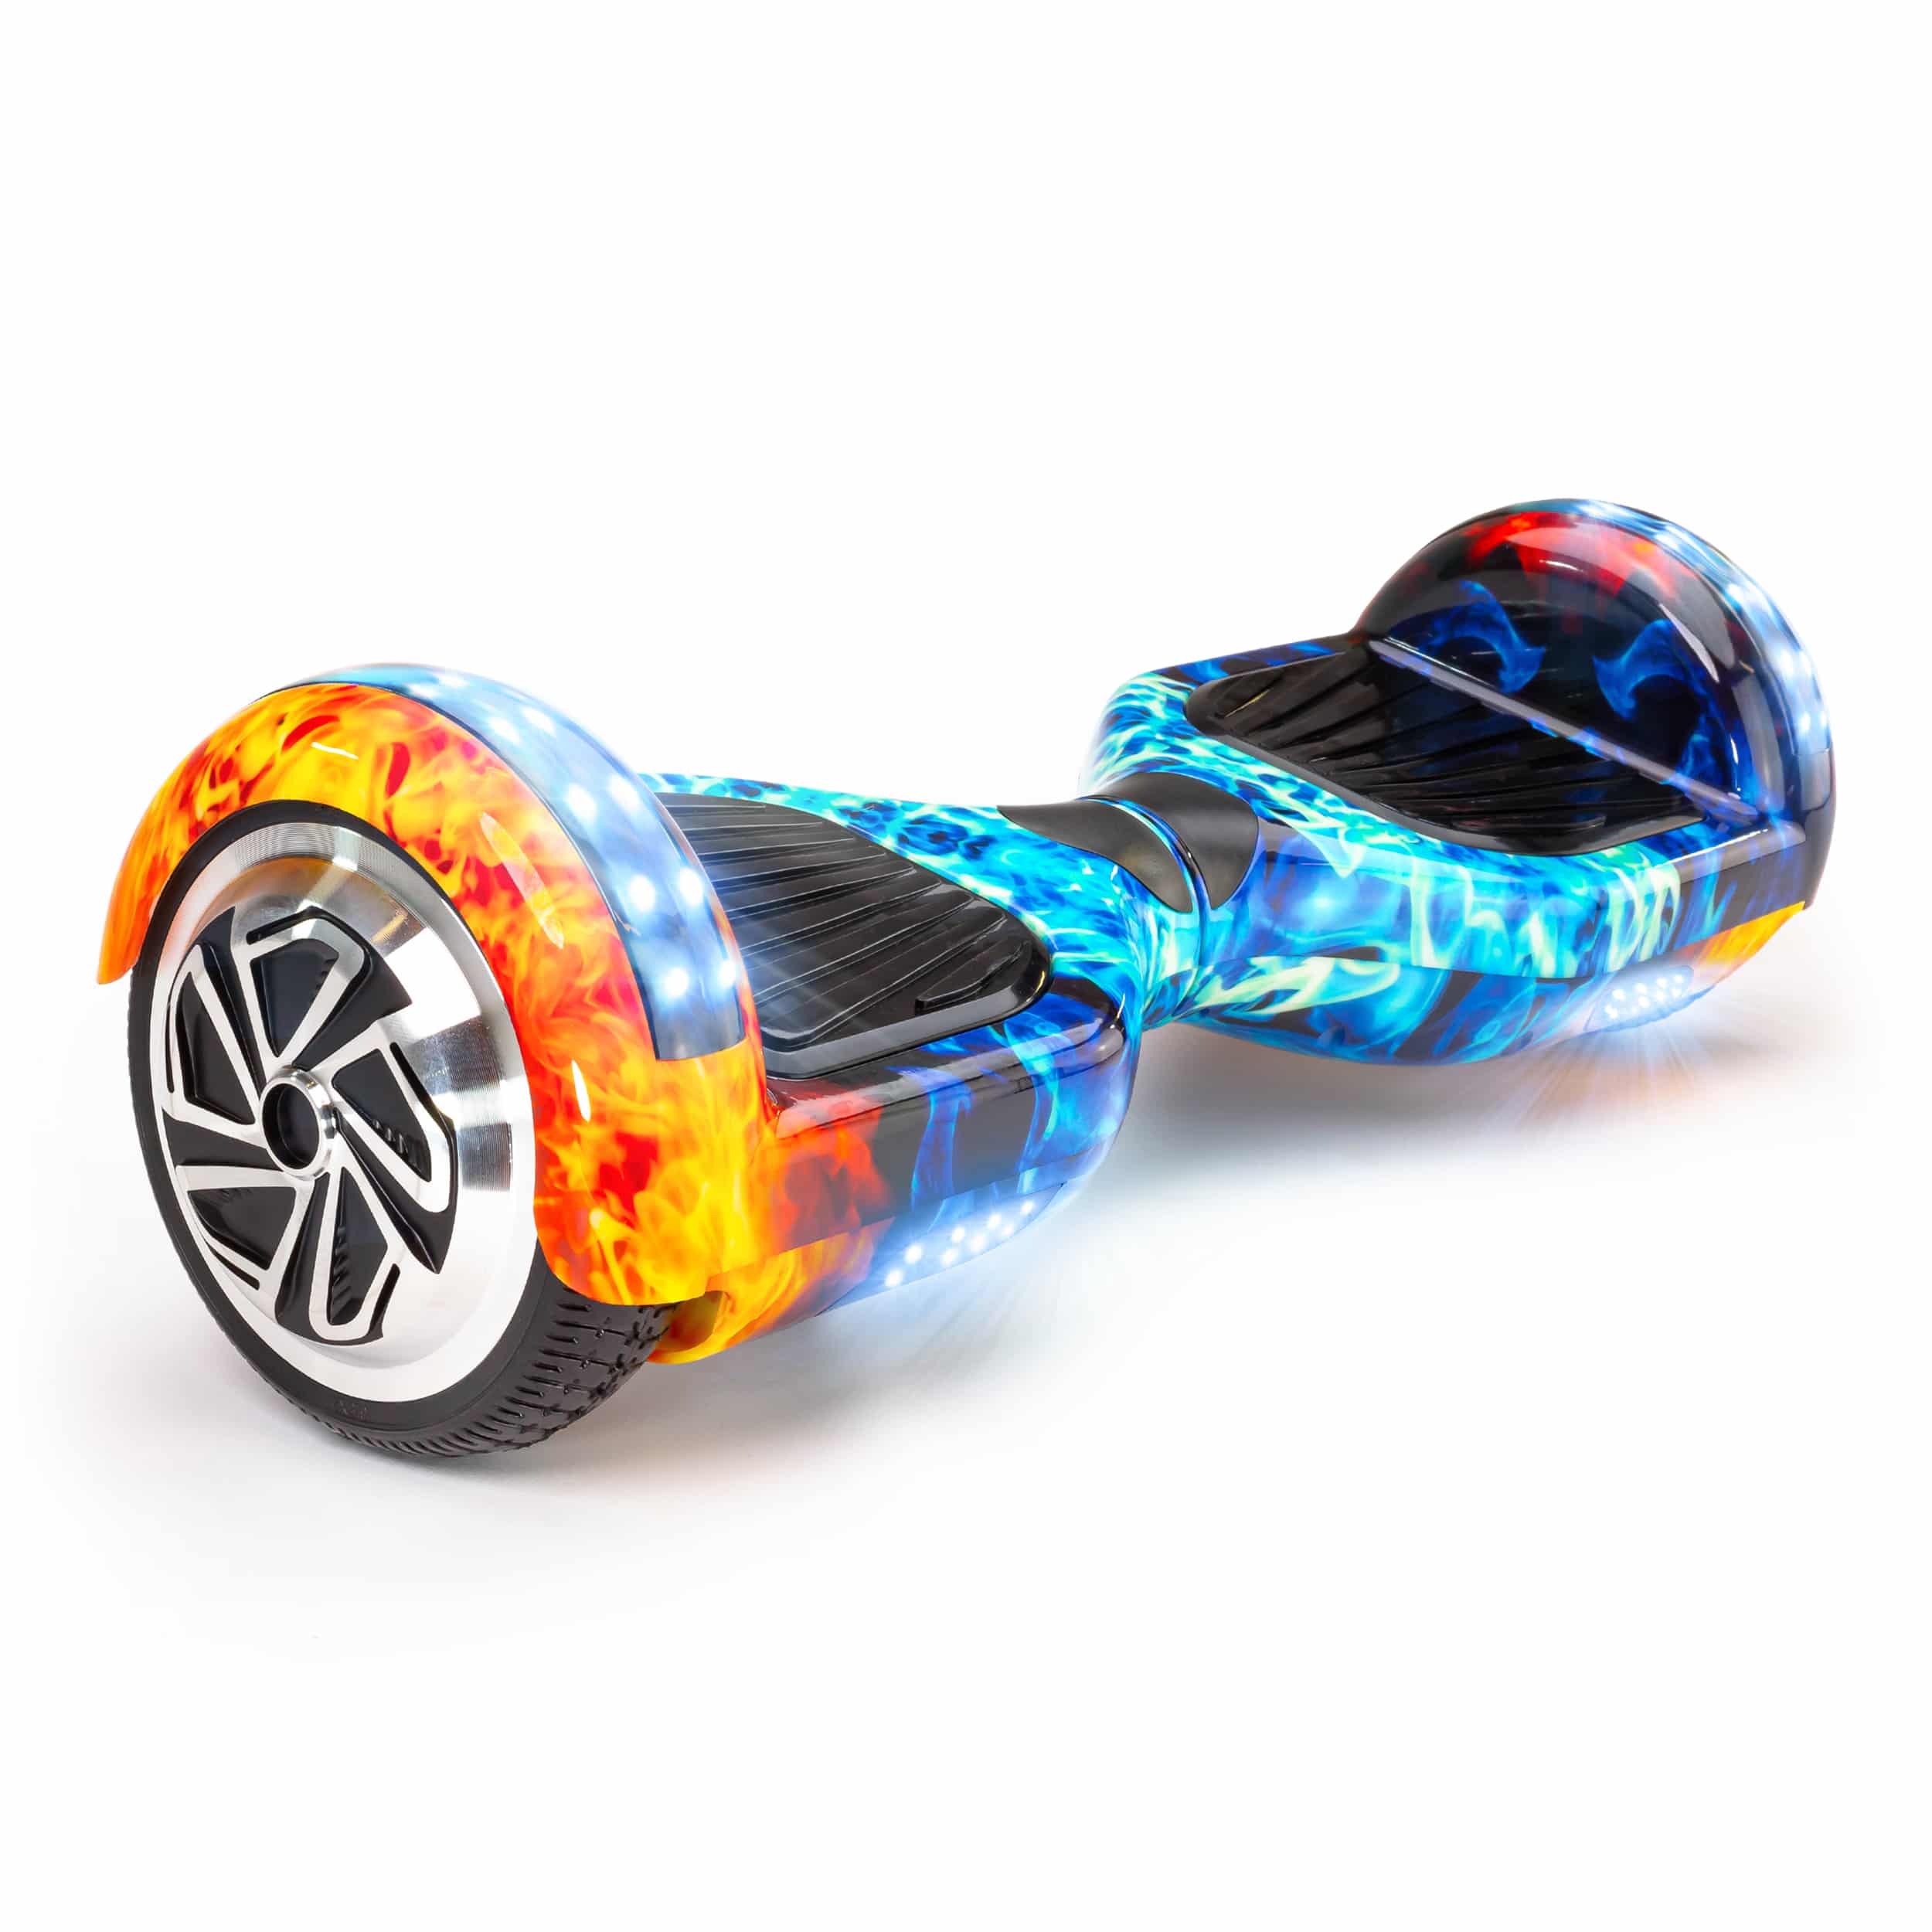 Coolfire 6.5 inch hoverboard